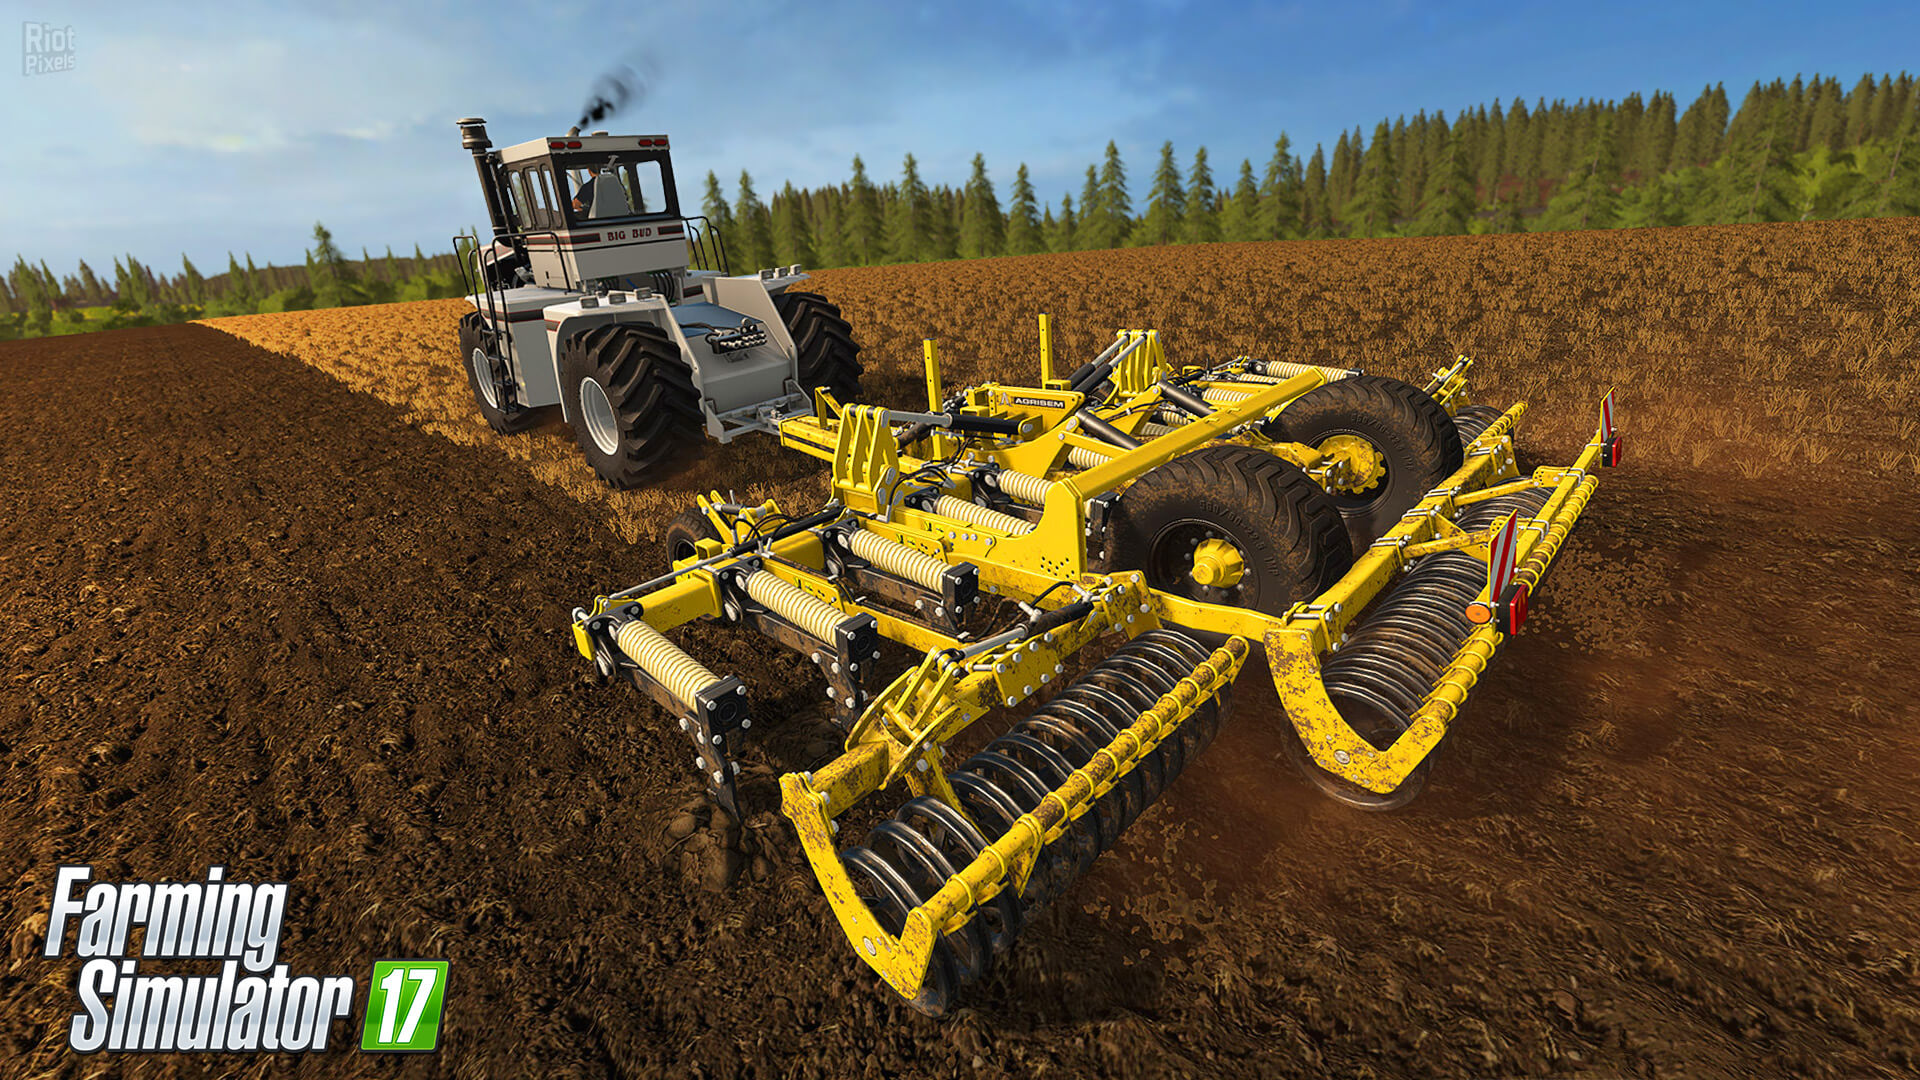 Download Farming Simulator 17 Full Game Highly Compressed For PC - TraX Gaming Center